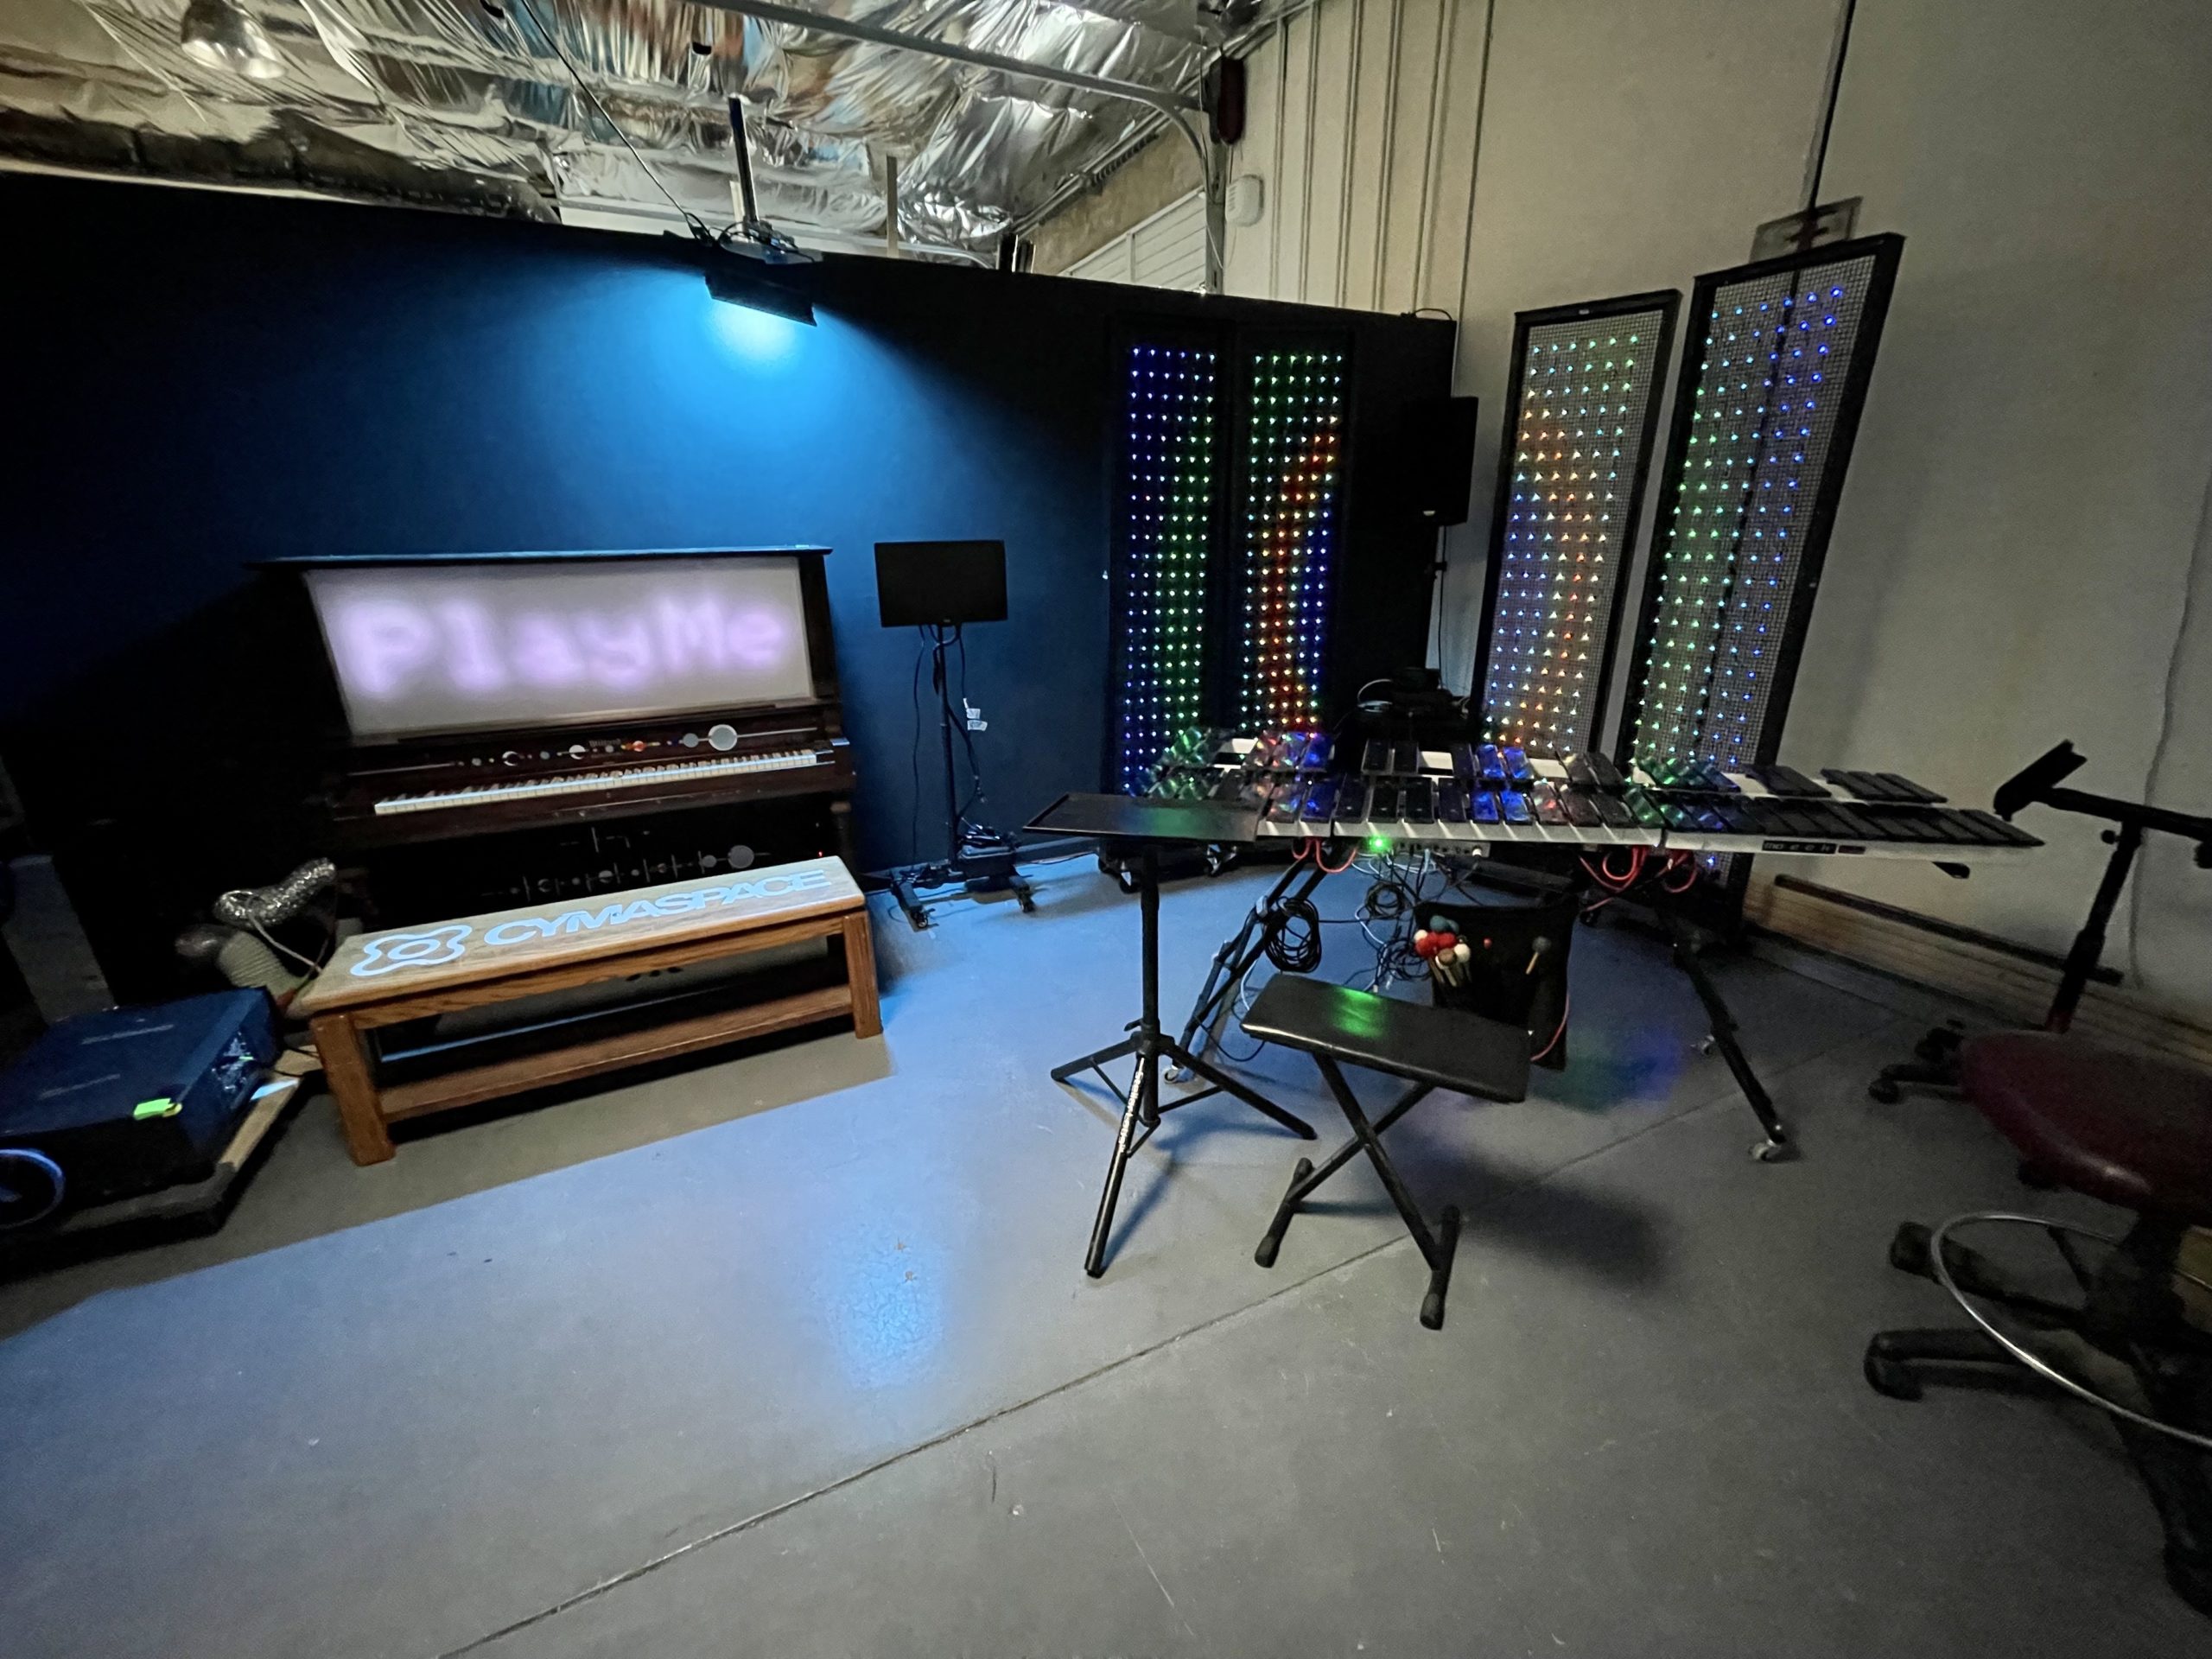 a corner of a workshop with a dark coal gray wall backdrop, there is an upright piano with a display that says "Play Me", next to it are four light fixtures with LED pixels displaying rainbow colors in a circular pattern of blue, green, orange, blue. In front of the light fixtures is an electronic marimba instrument with black keys.